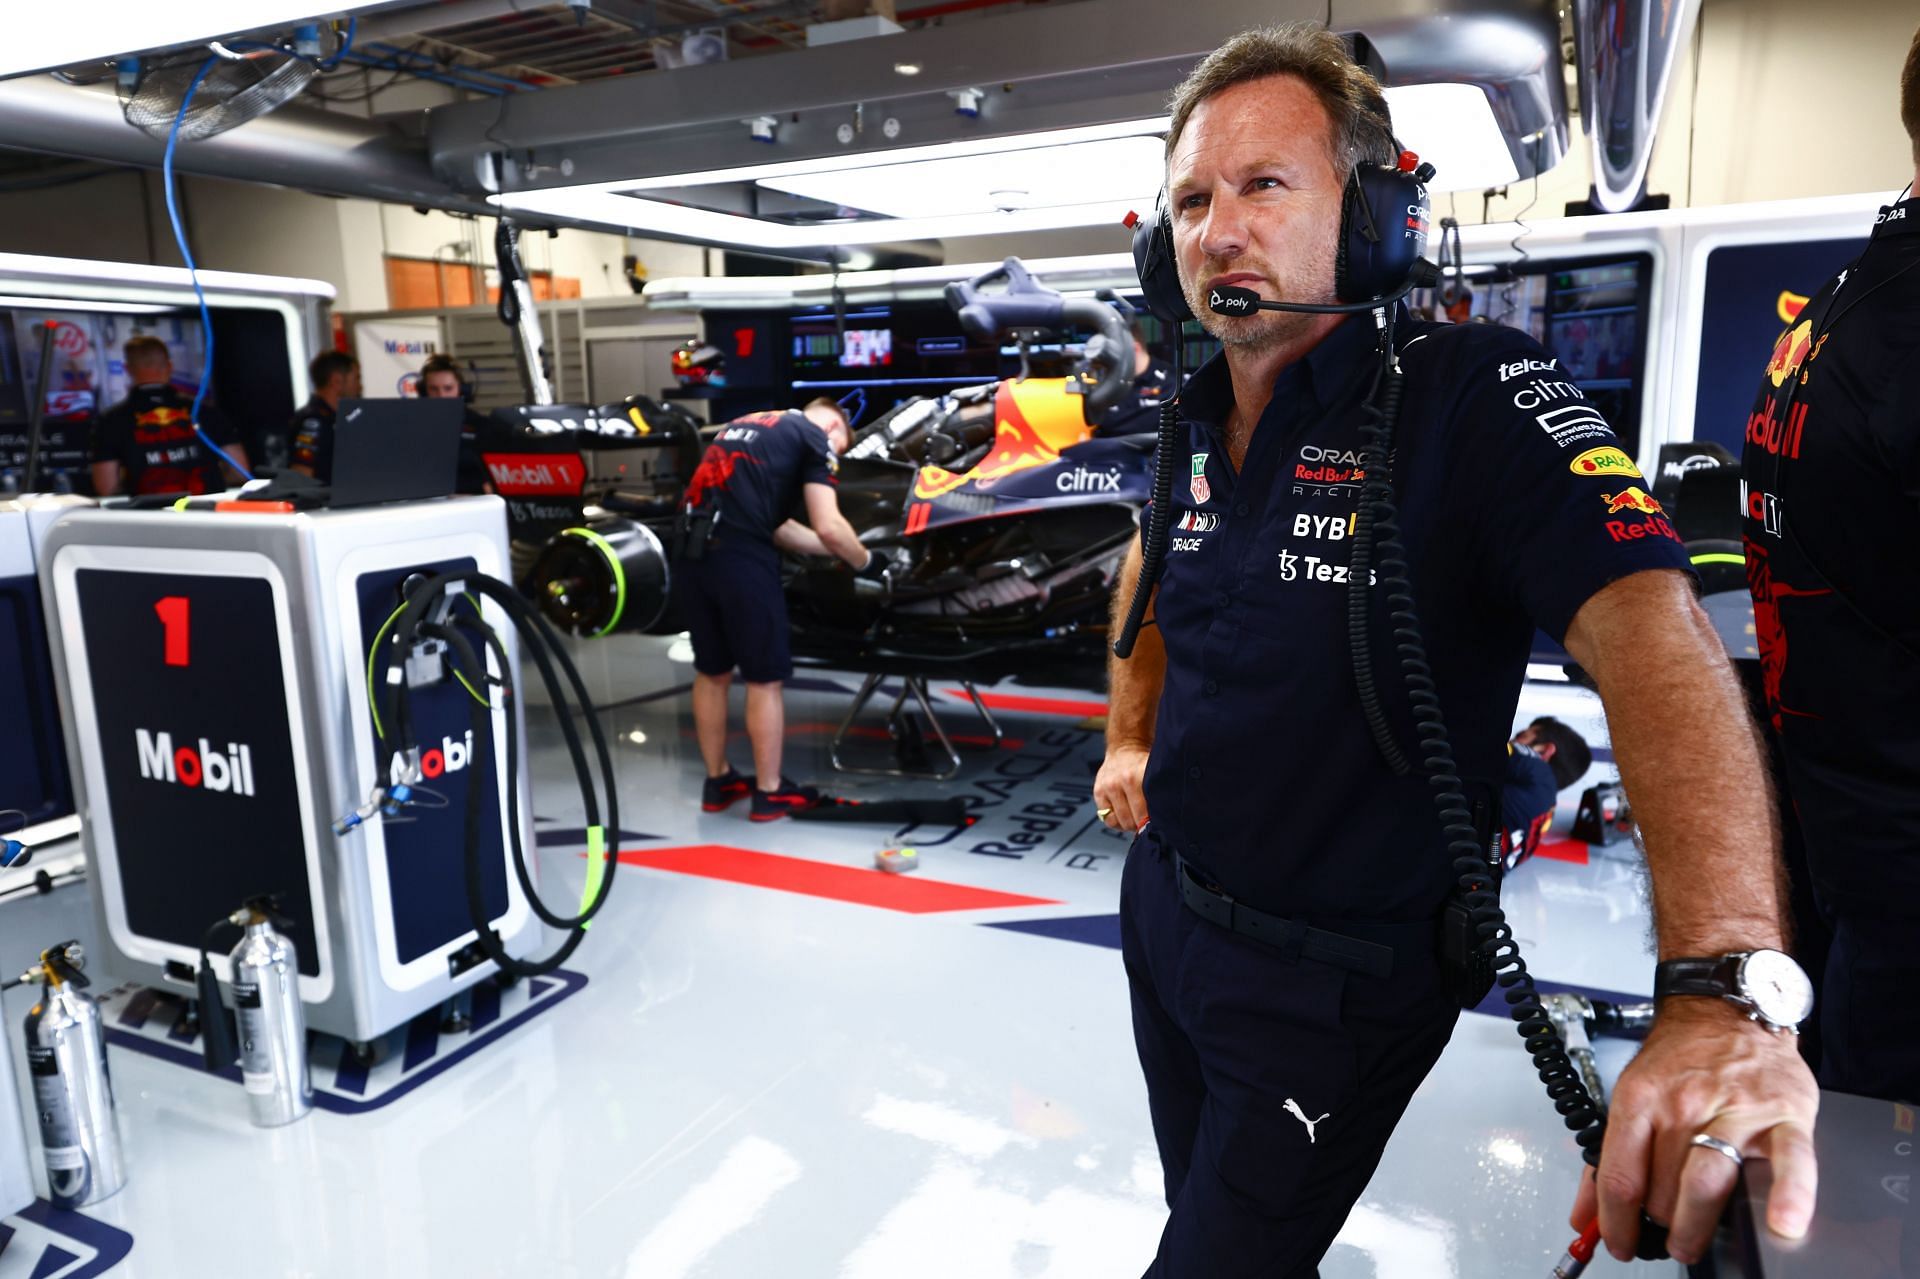 F1 Grand Prix of Miami - Final Practice - Christian Horner oversees operations.